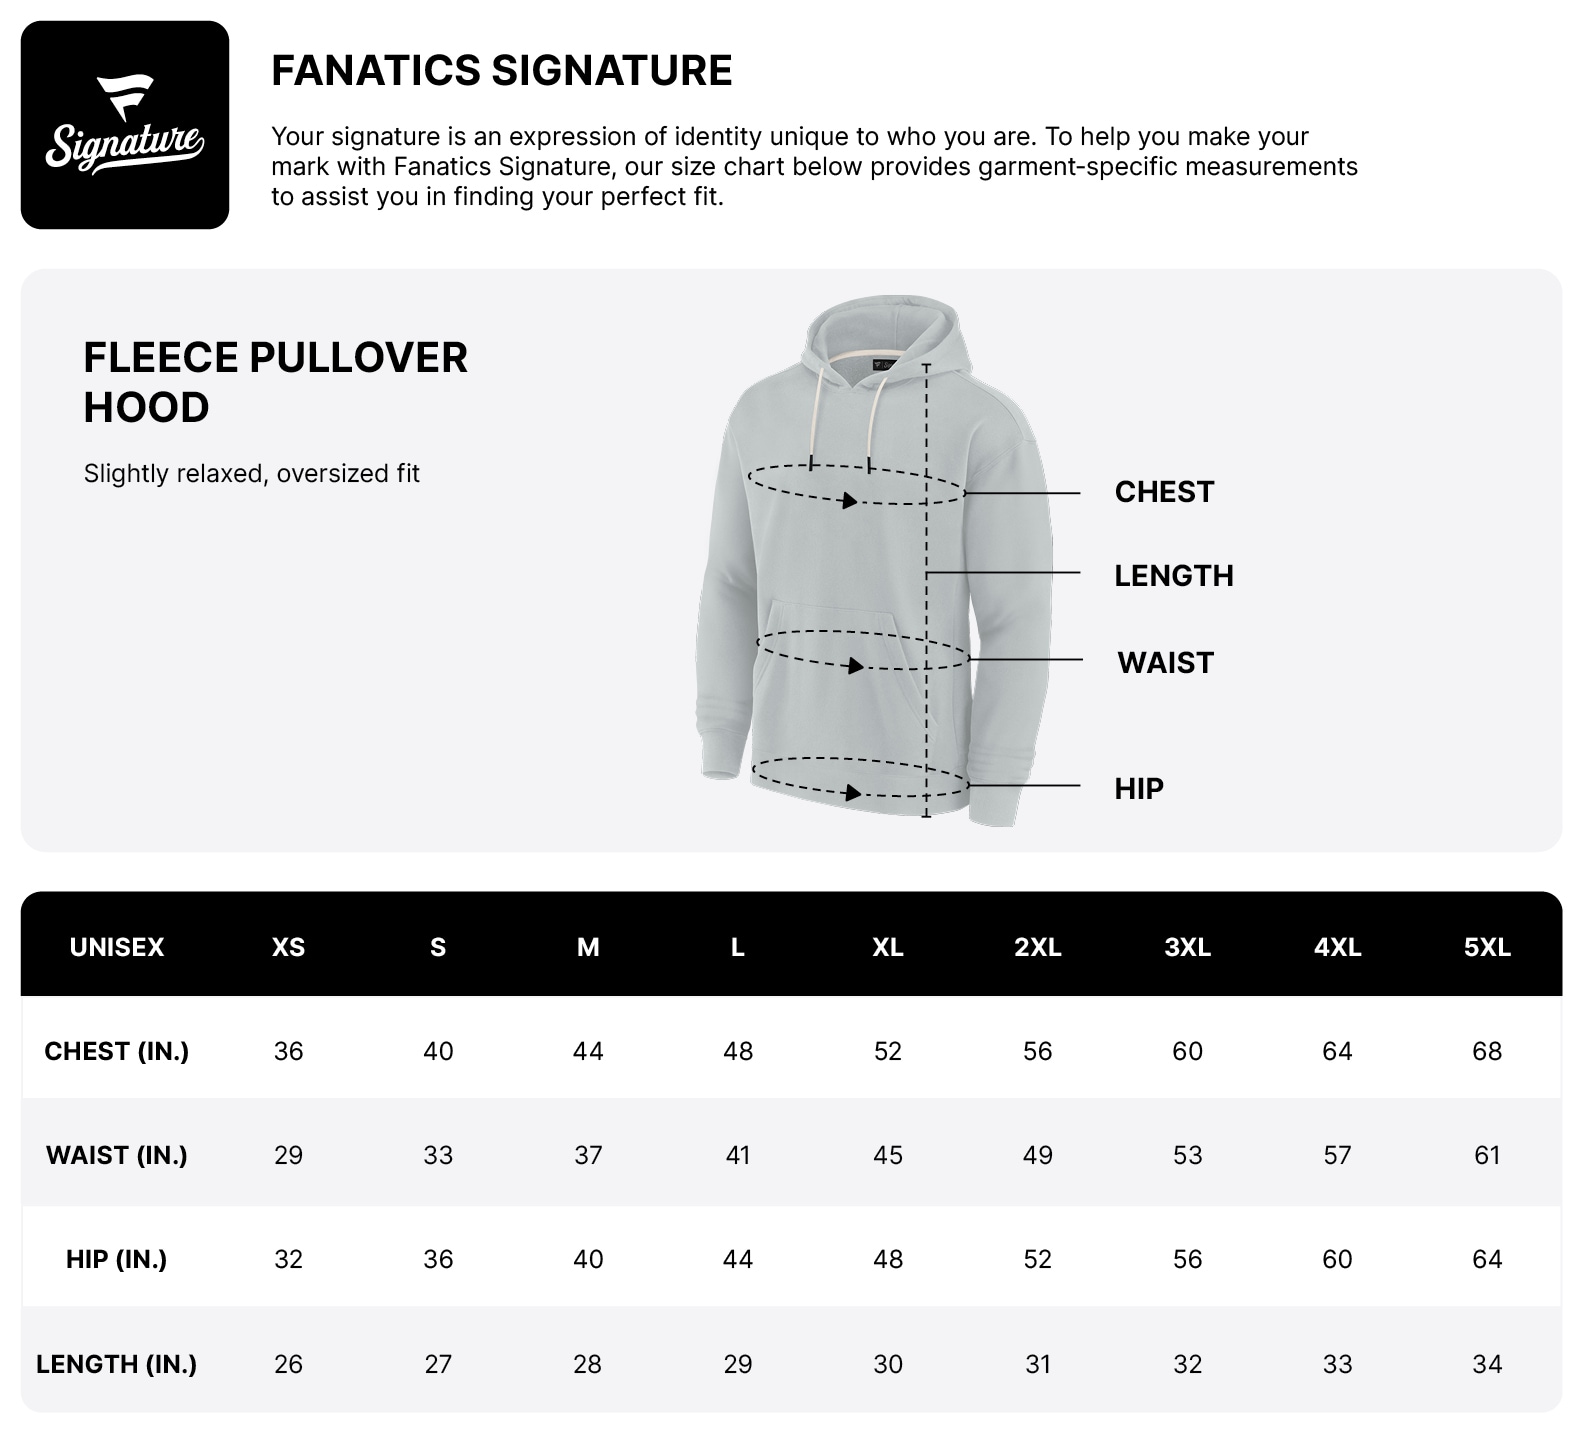 Fanatics Signature. Your signature is an expression of identity unique to who you are. To help you make your mark with Fanatics Signature, our size chart below provides garment-specific measurements to assist you in finding your perfect fit. Fleece Pullover Hood. Slightly relaxed, oversized fit.